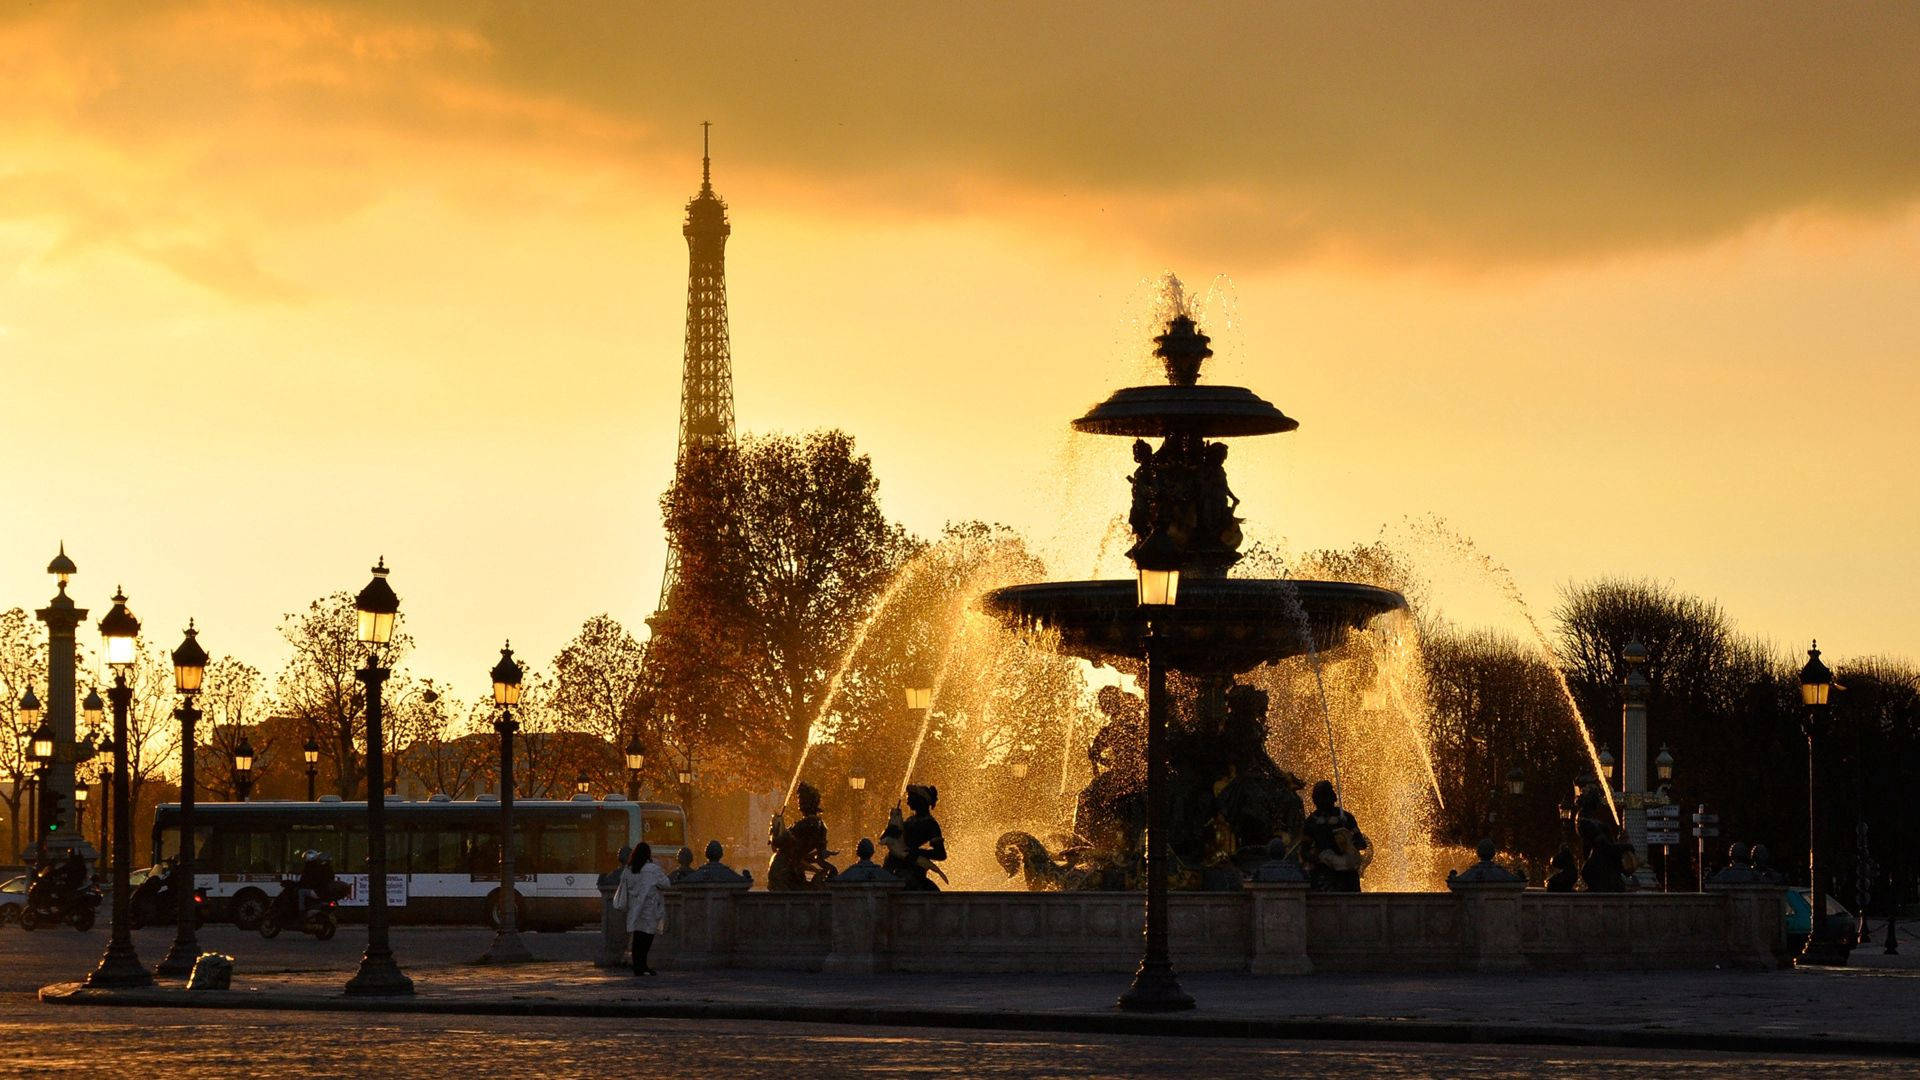 The Beauty Of The City Of Paris At Dusk, As Illuminated By The Sunset Over Place De La Concorde. Wallpaper